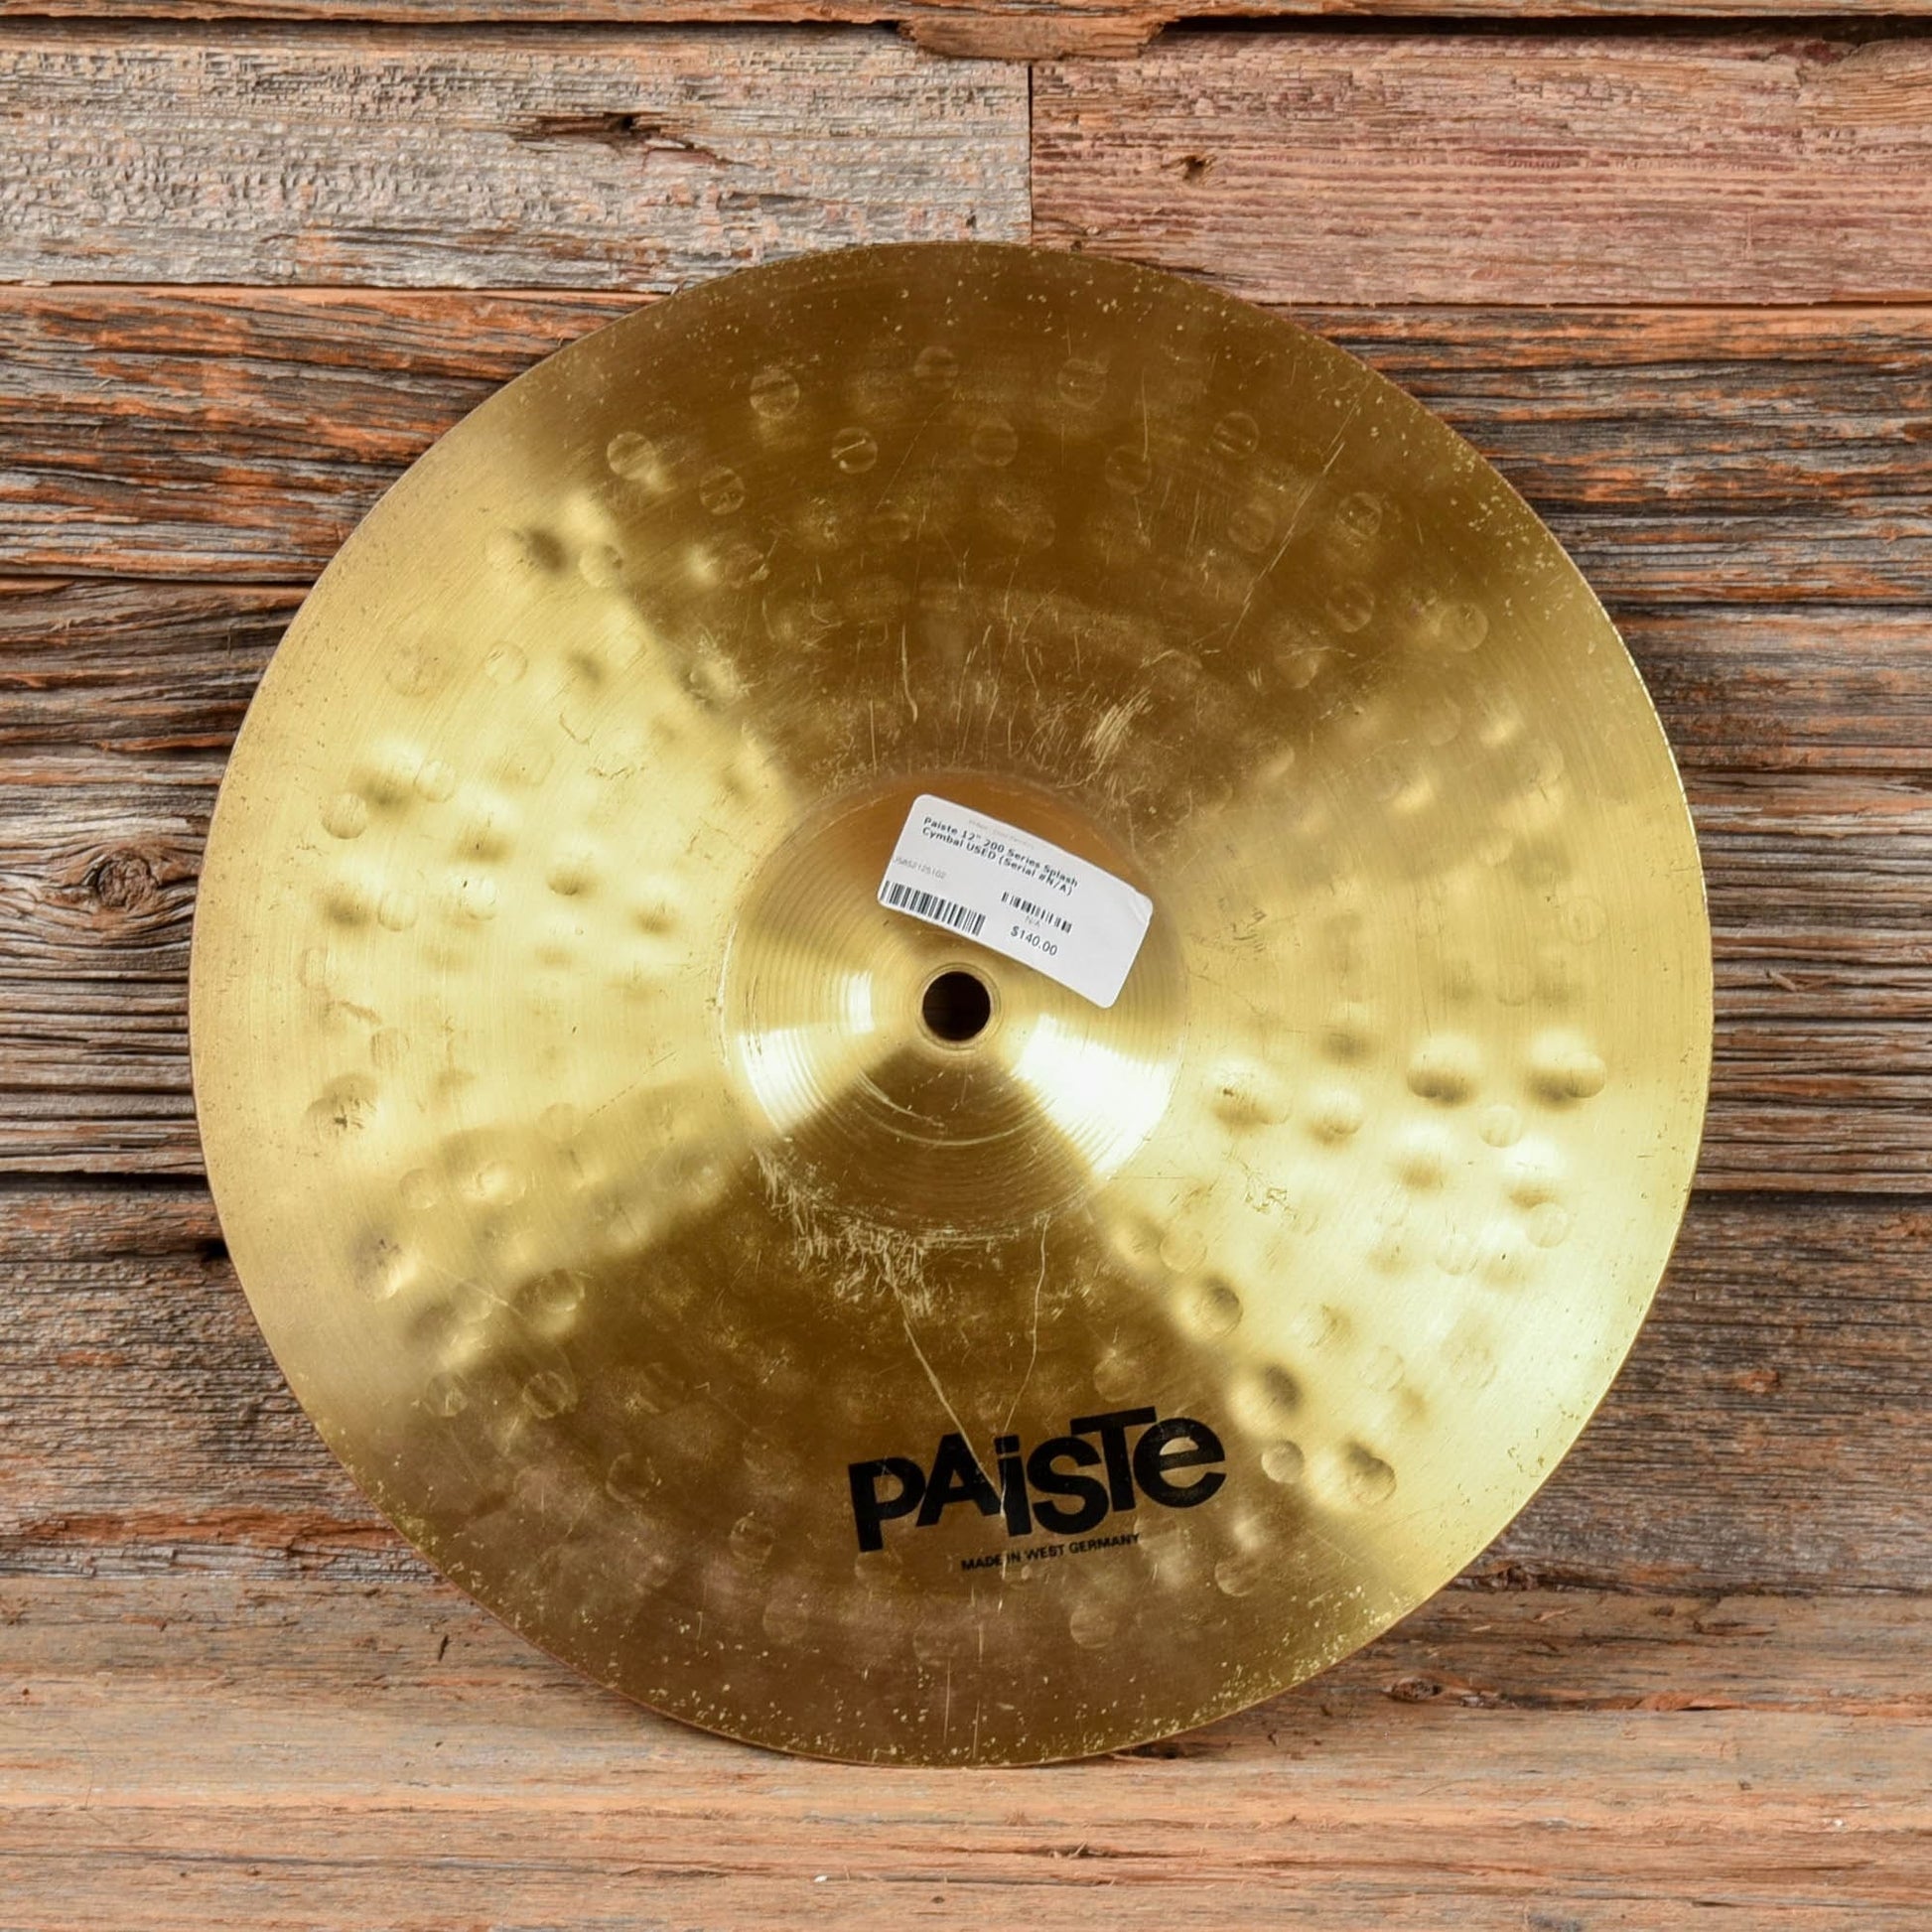 Paiste 12" 200 Series Splash Cymbal USED Drums and Percussion